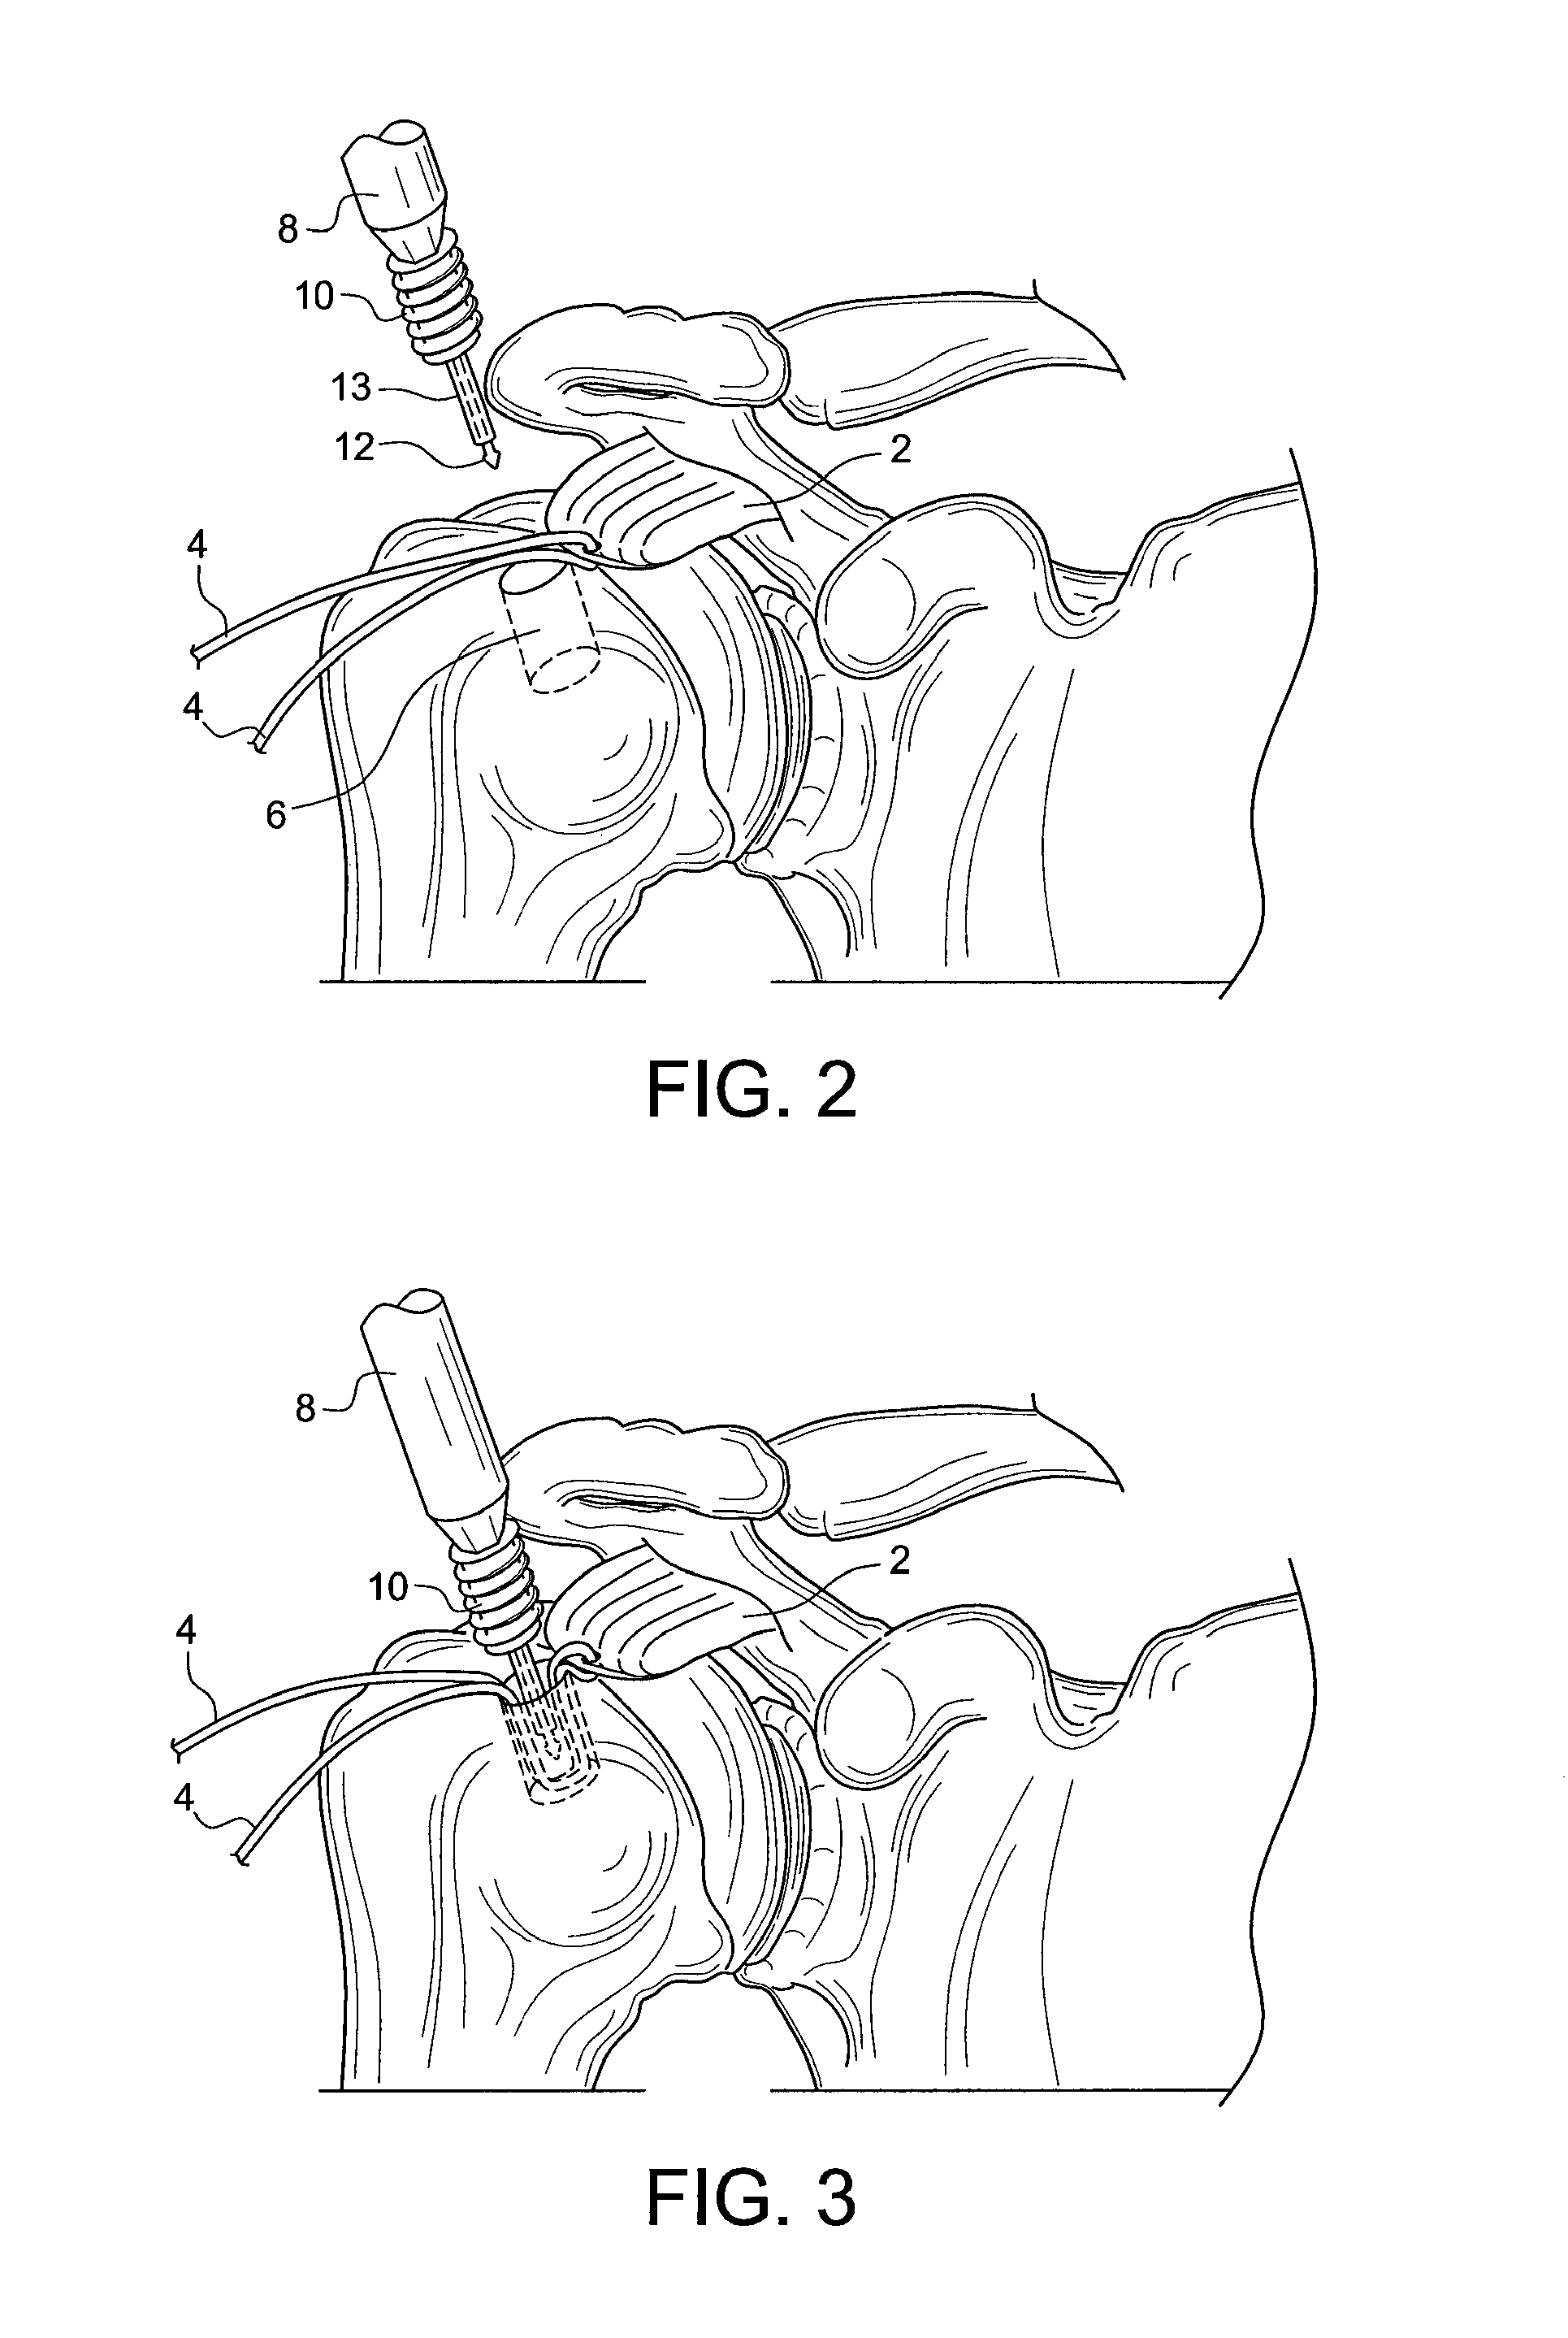 Knotless anchor for surgical repair